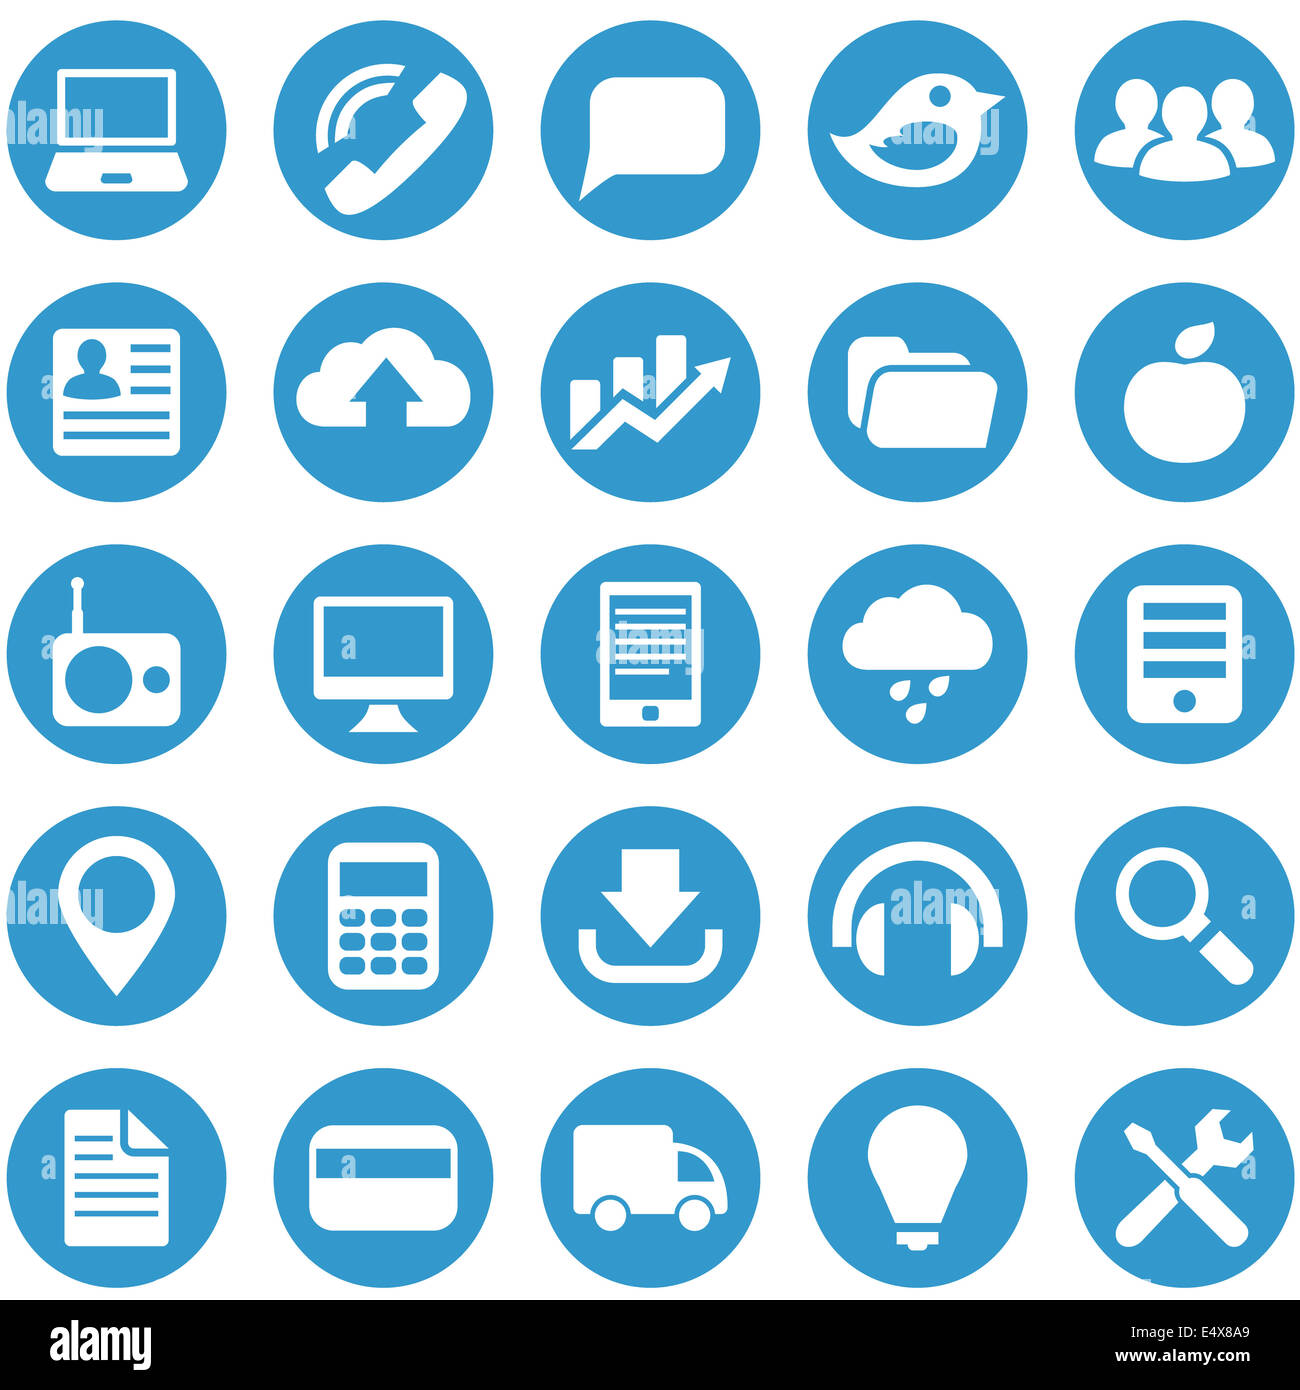 Icons for web site in blue circle. Stock Photo